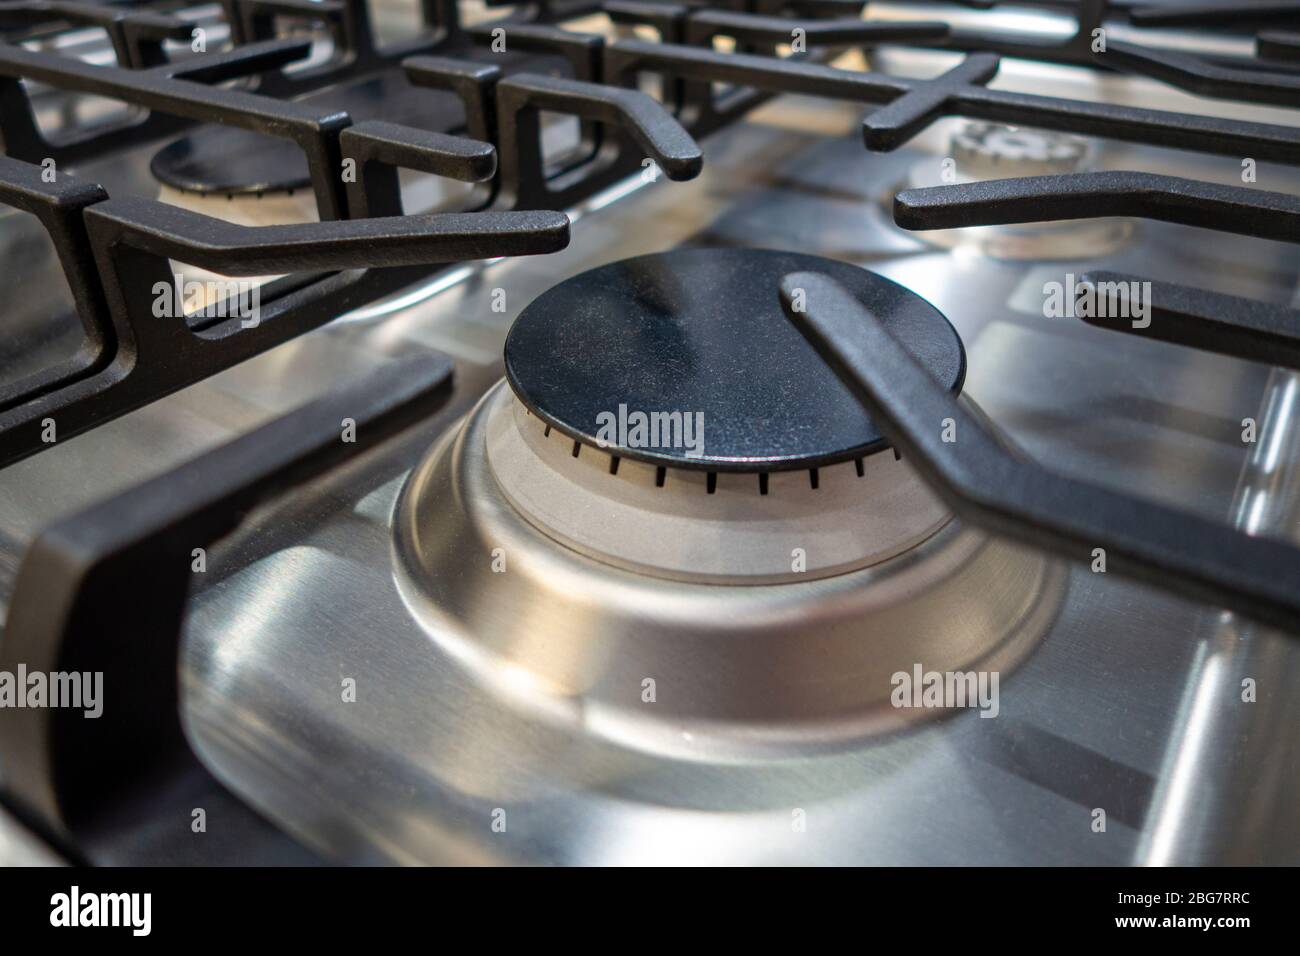 residential kitchen burner and range dials close up Stock Photo